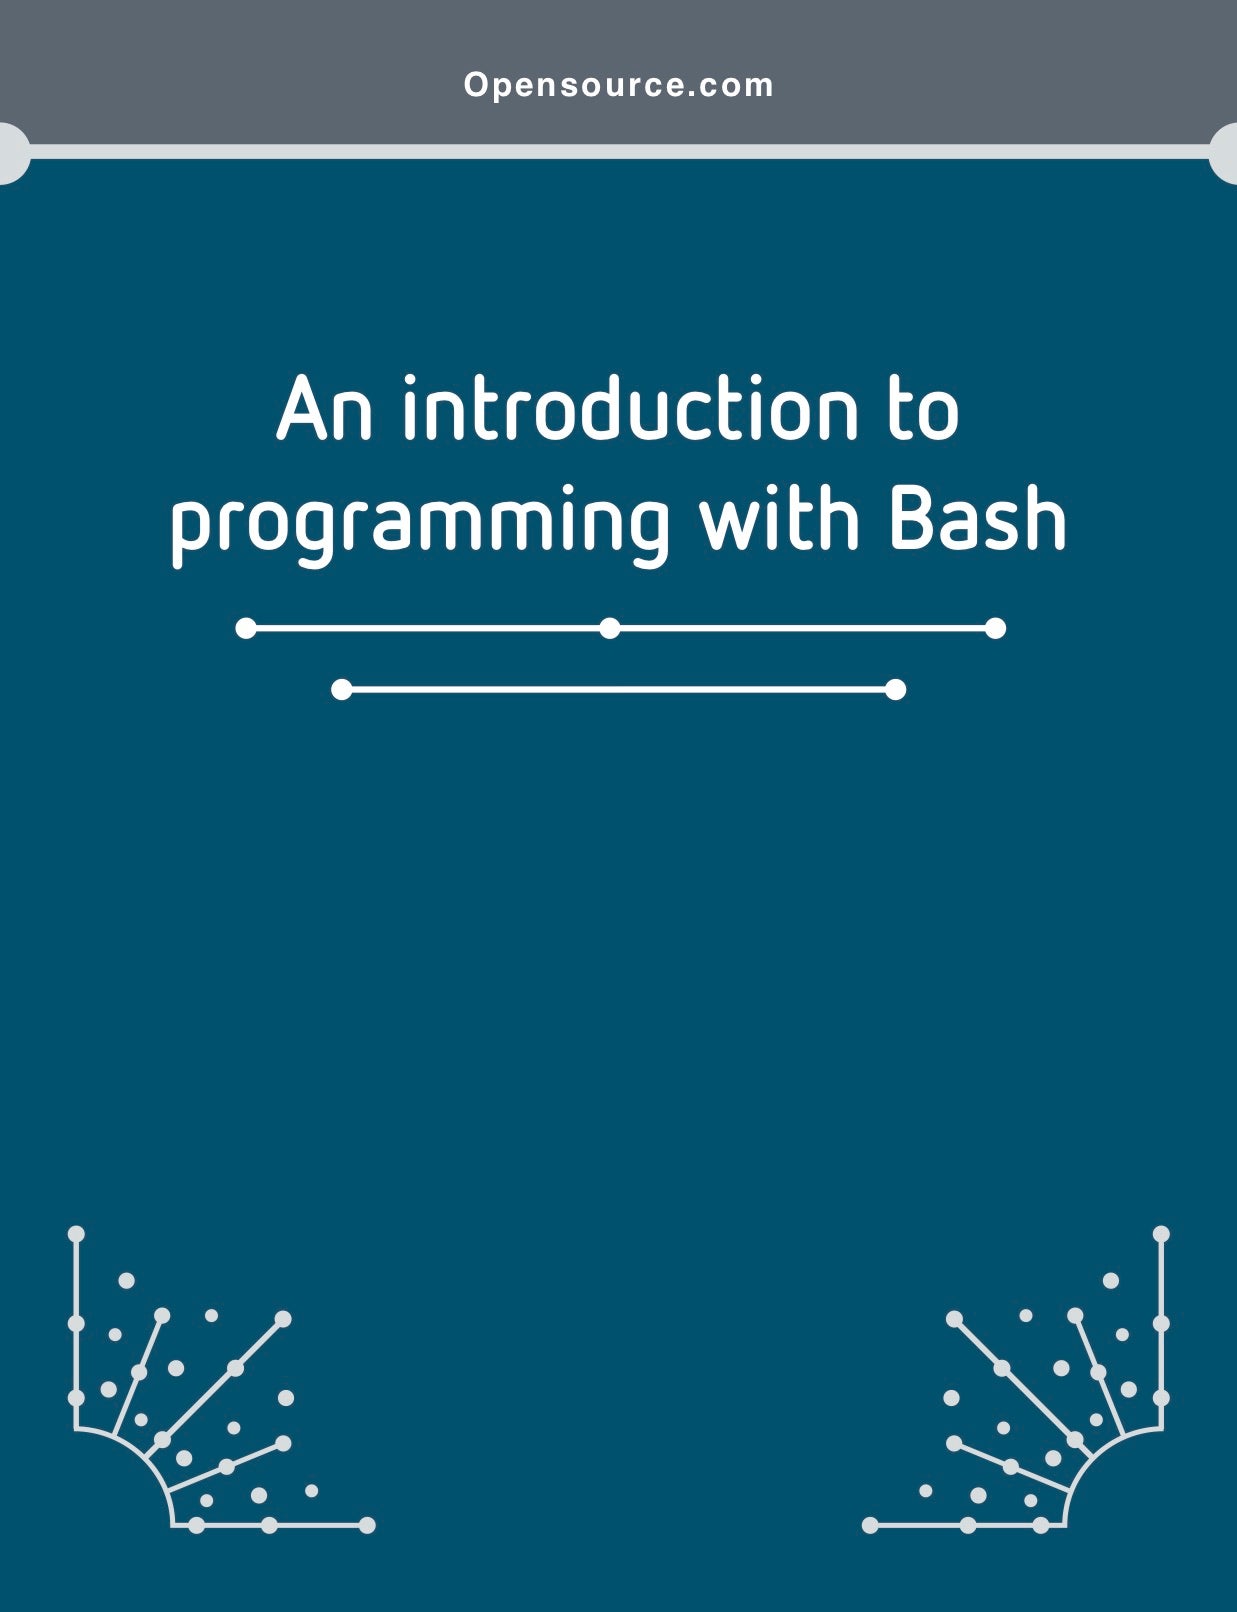 An introduction to programming with Bash